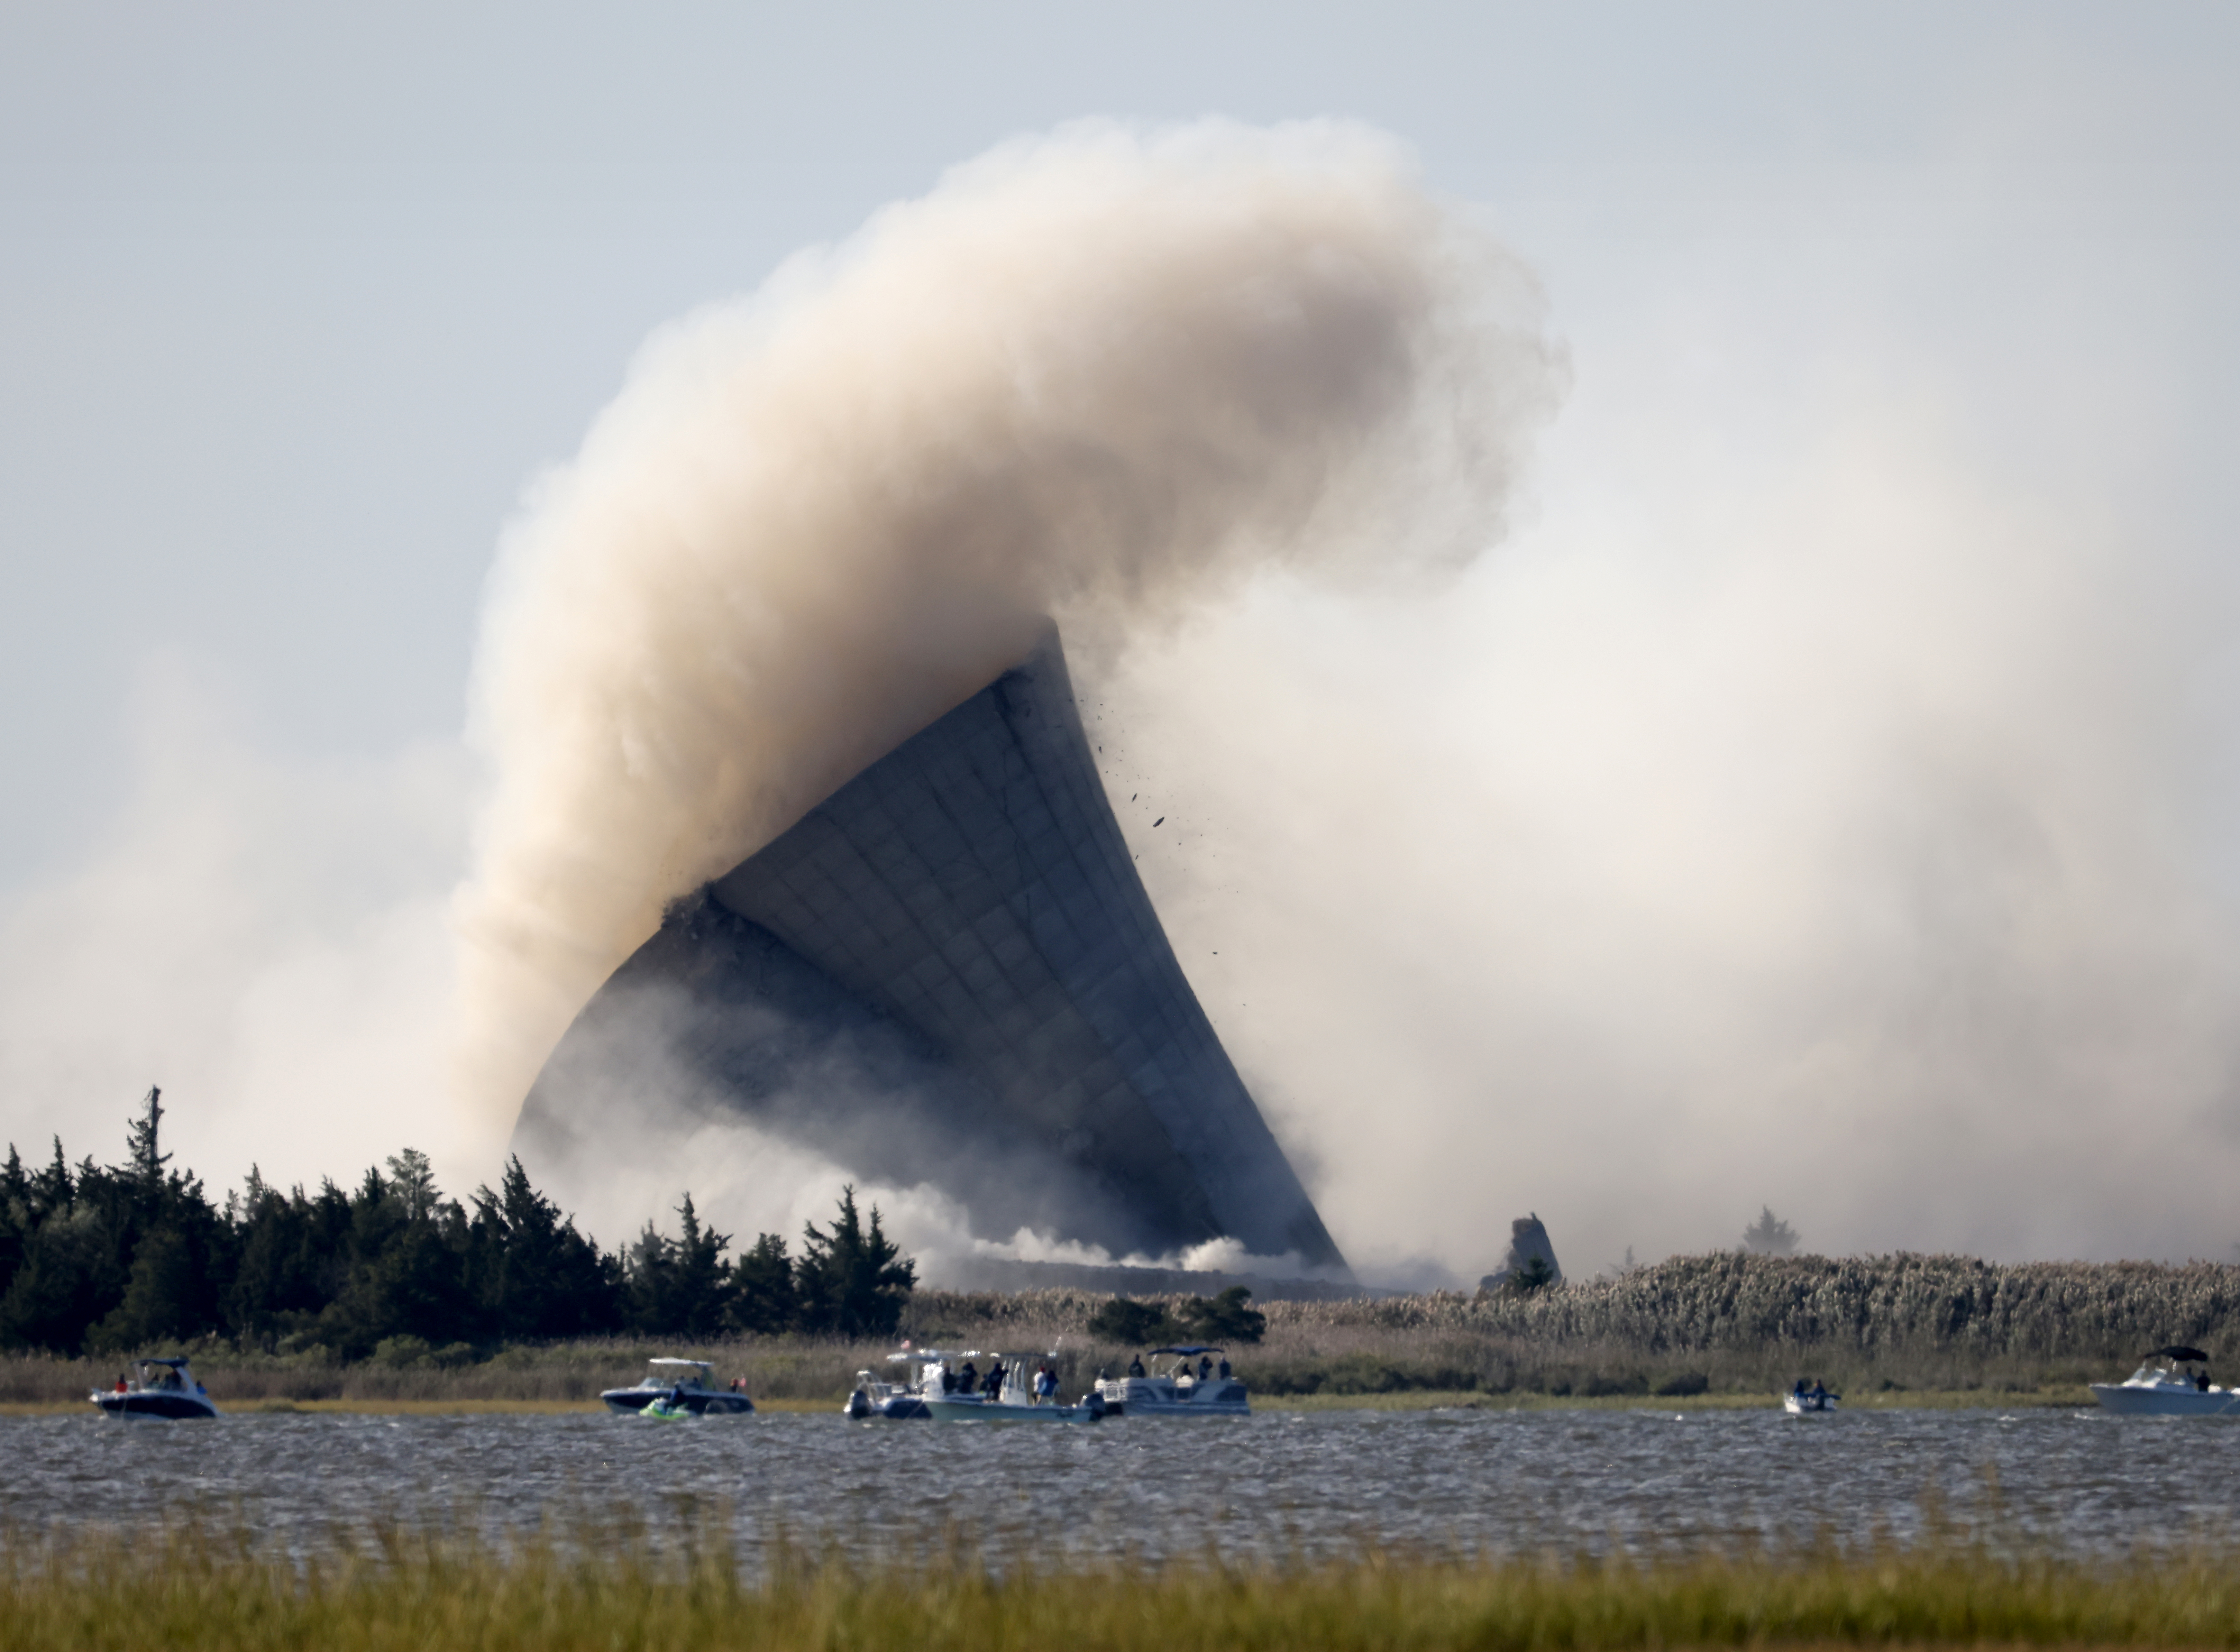 Kentucky Power implodes Big Sandy Unit 2 cooling tower, Local News